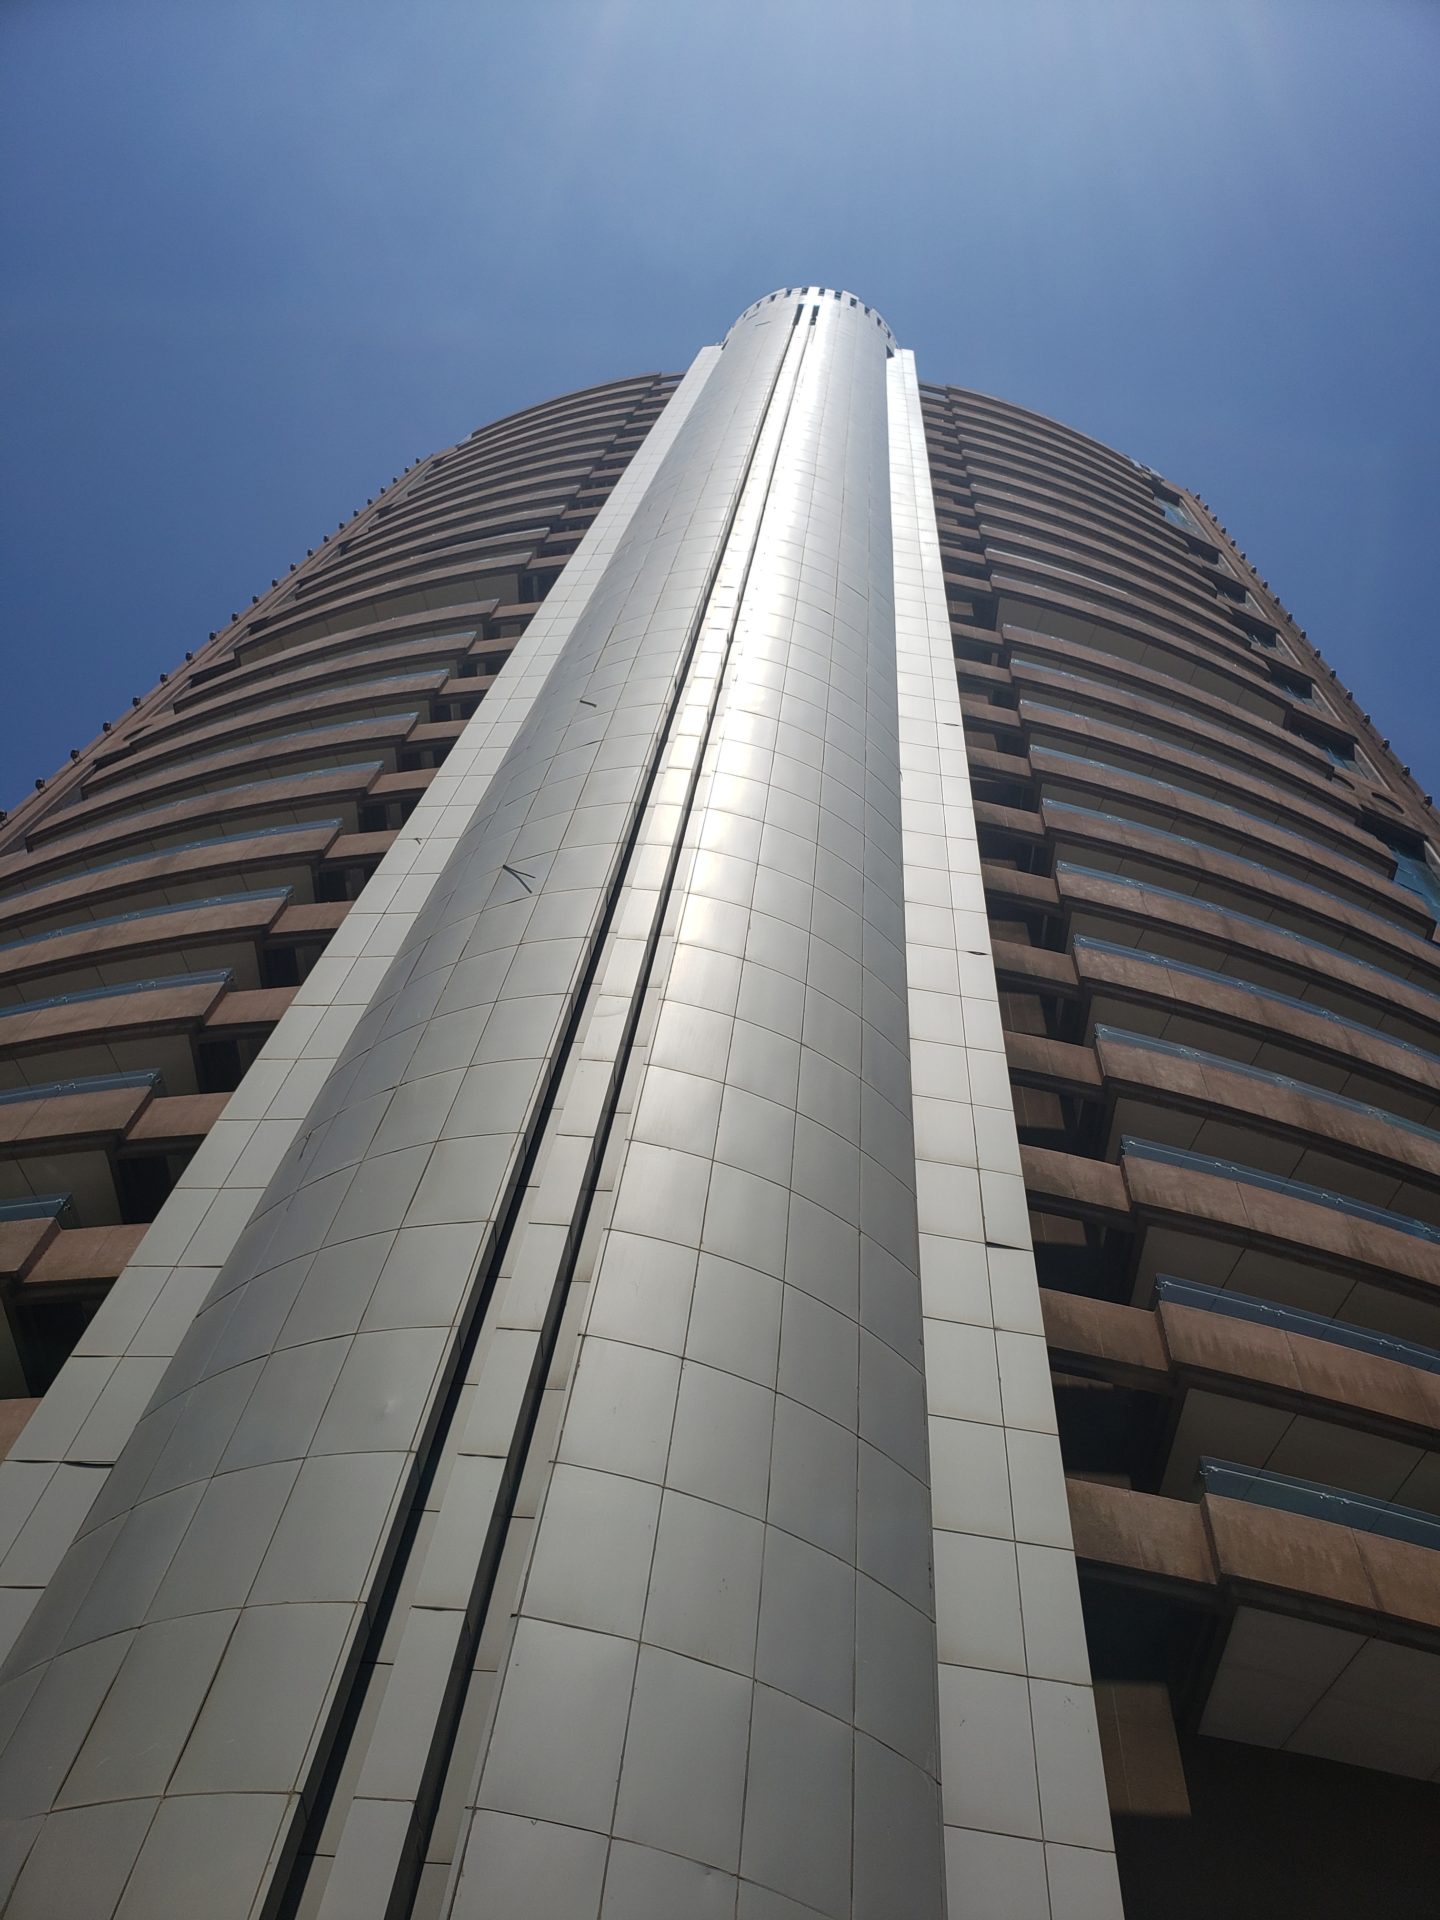 a tall building with a tall cylindrical tower